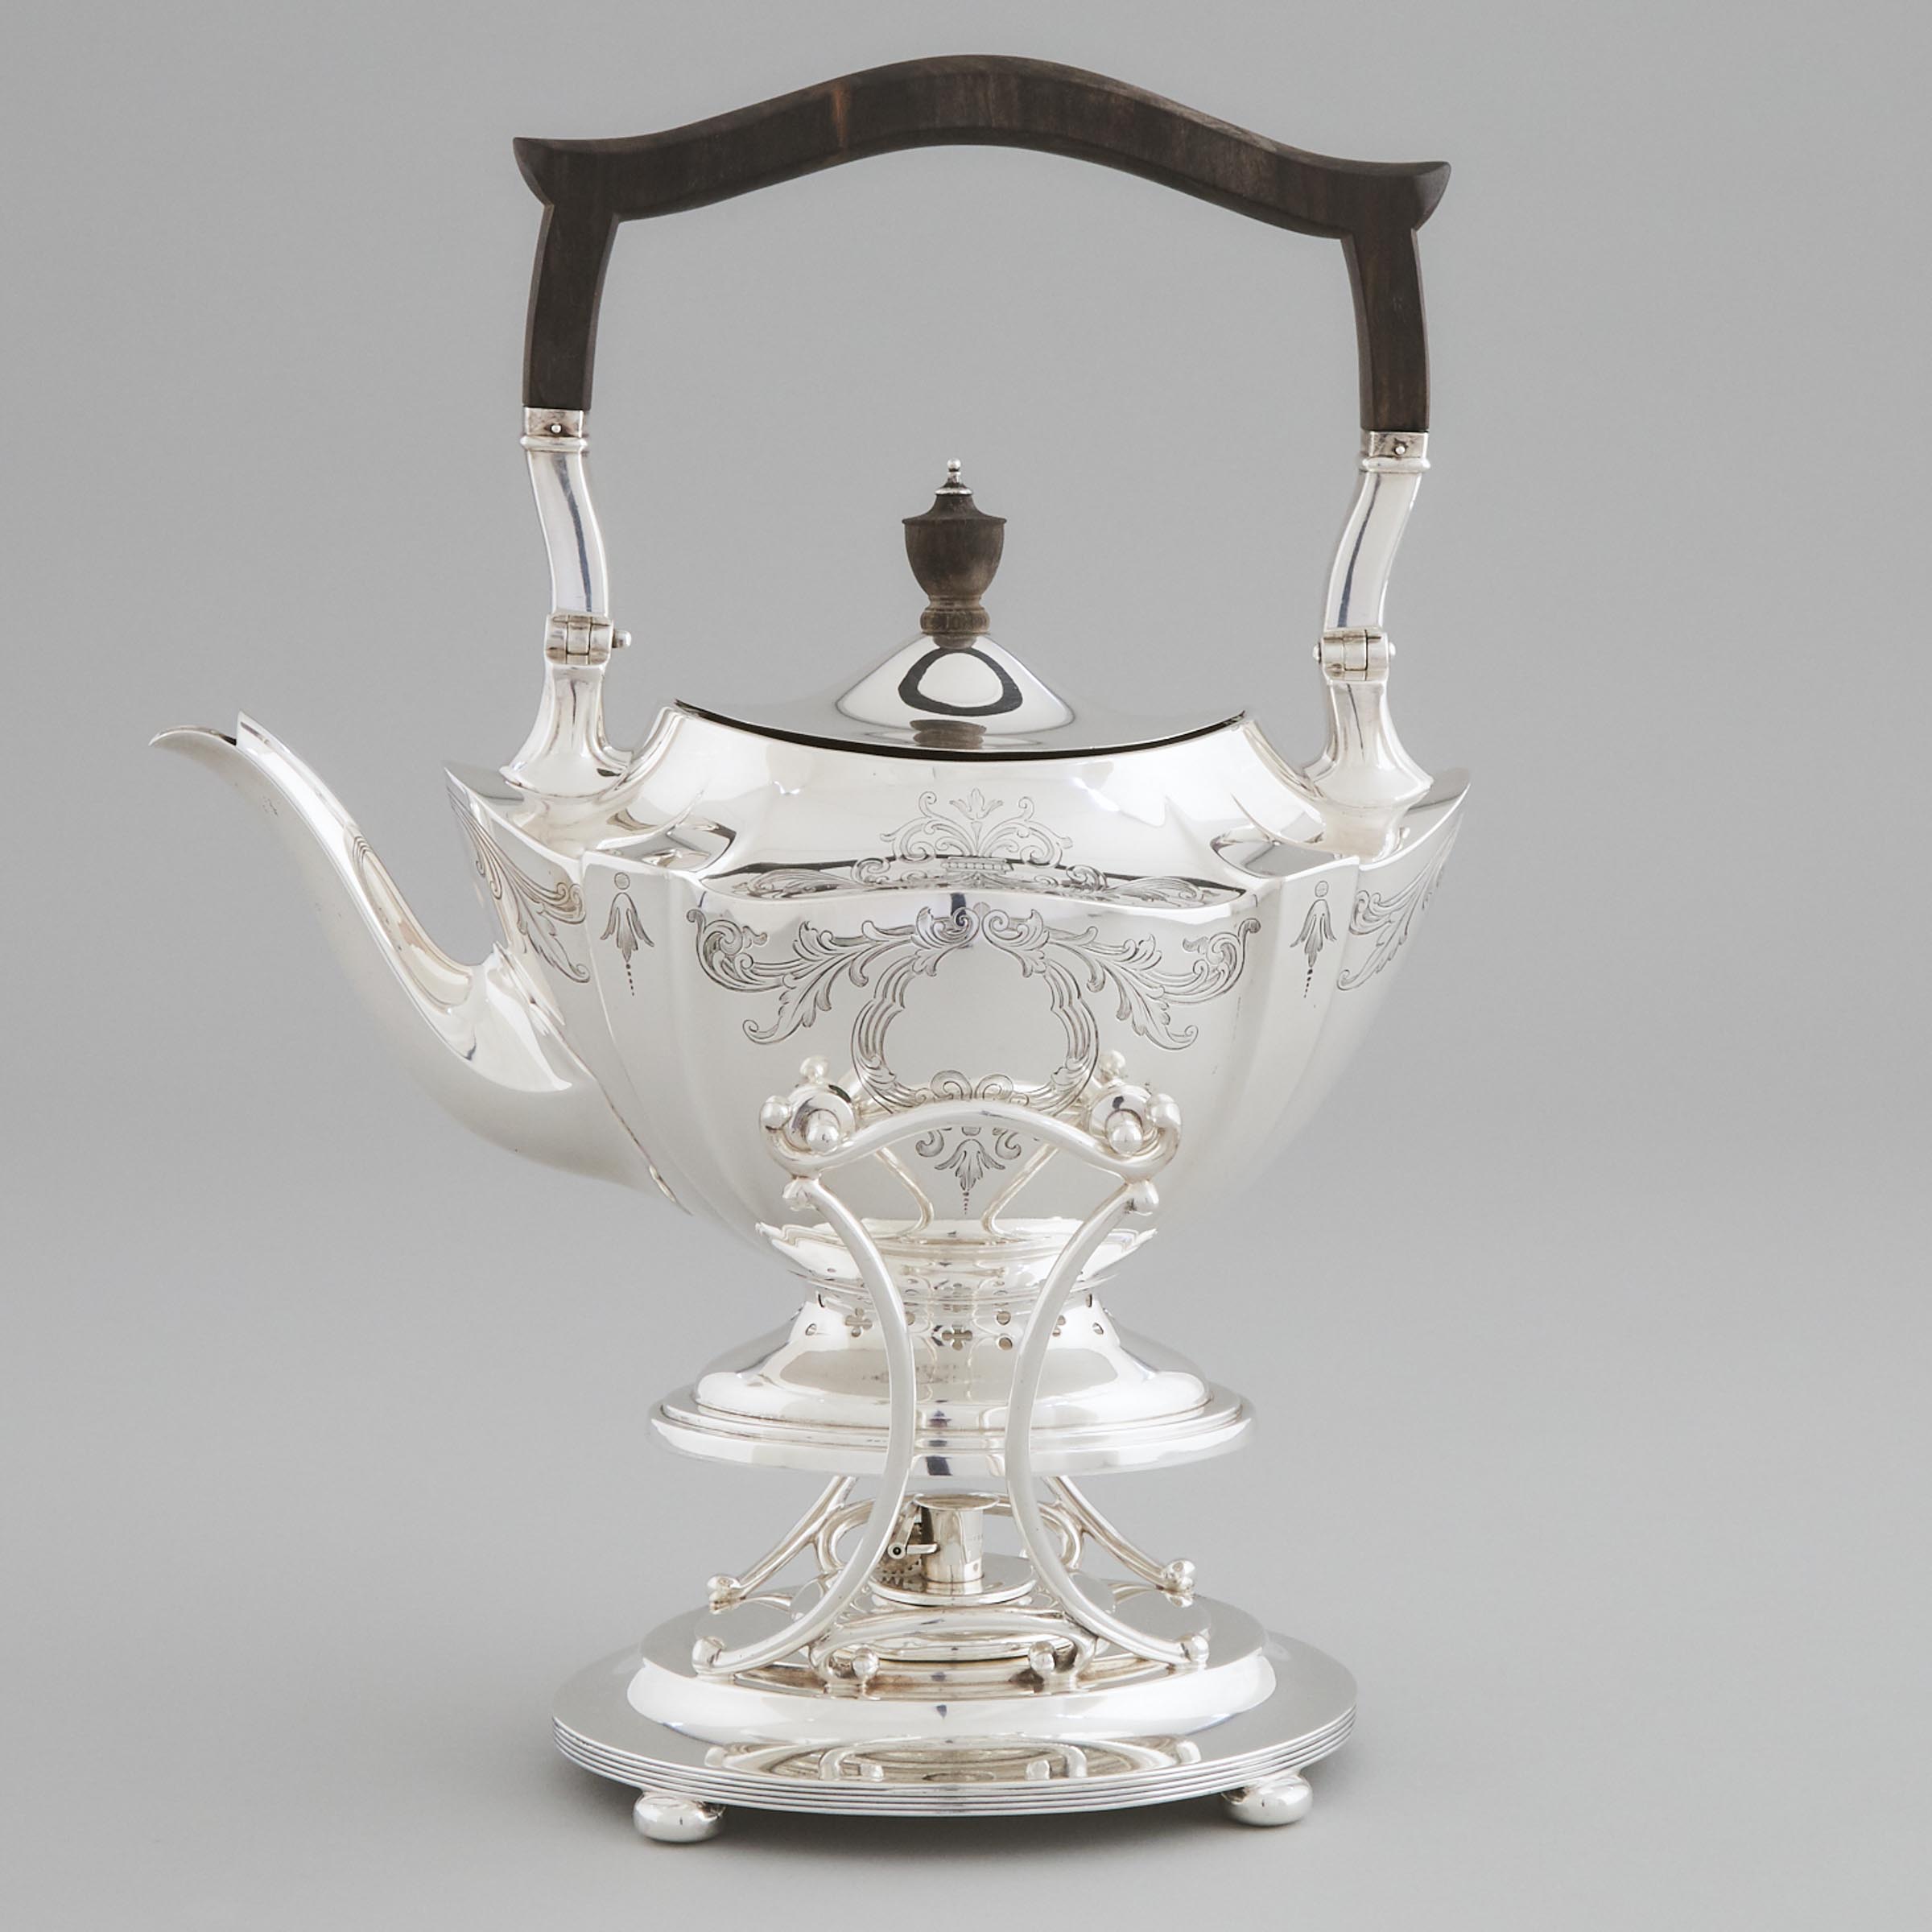 American Silver Kettle on Lampstand, Gorham Mfg. Co., Providence, R.I., 20th century